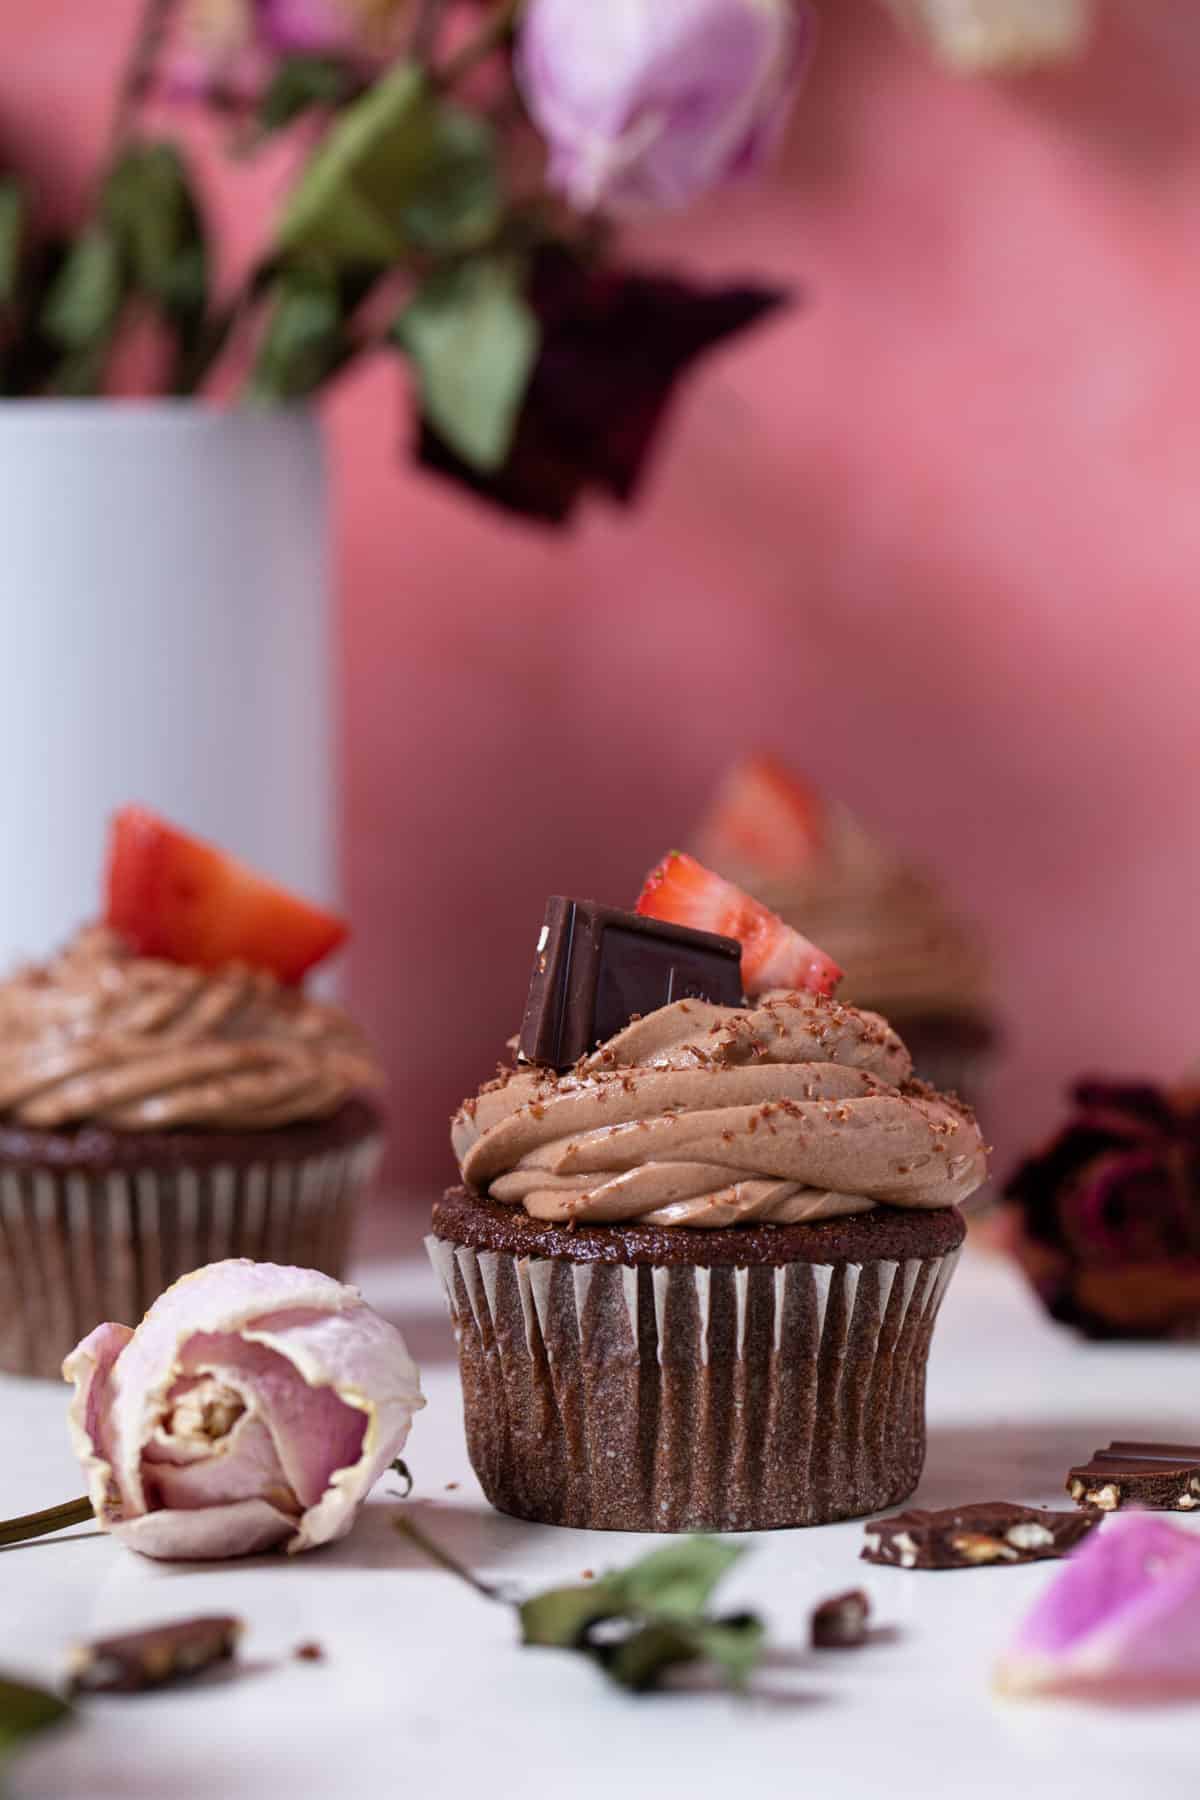 Break Up Bailey’s Chocolate Cupcakes on a table with roses.